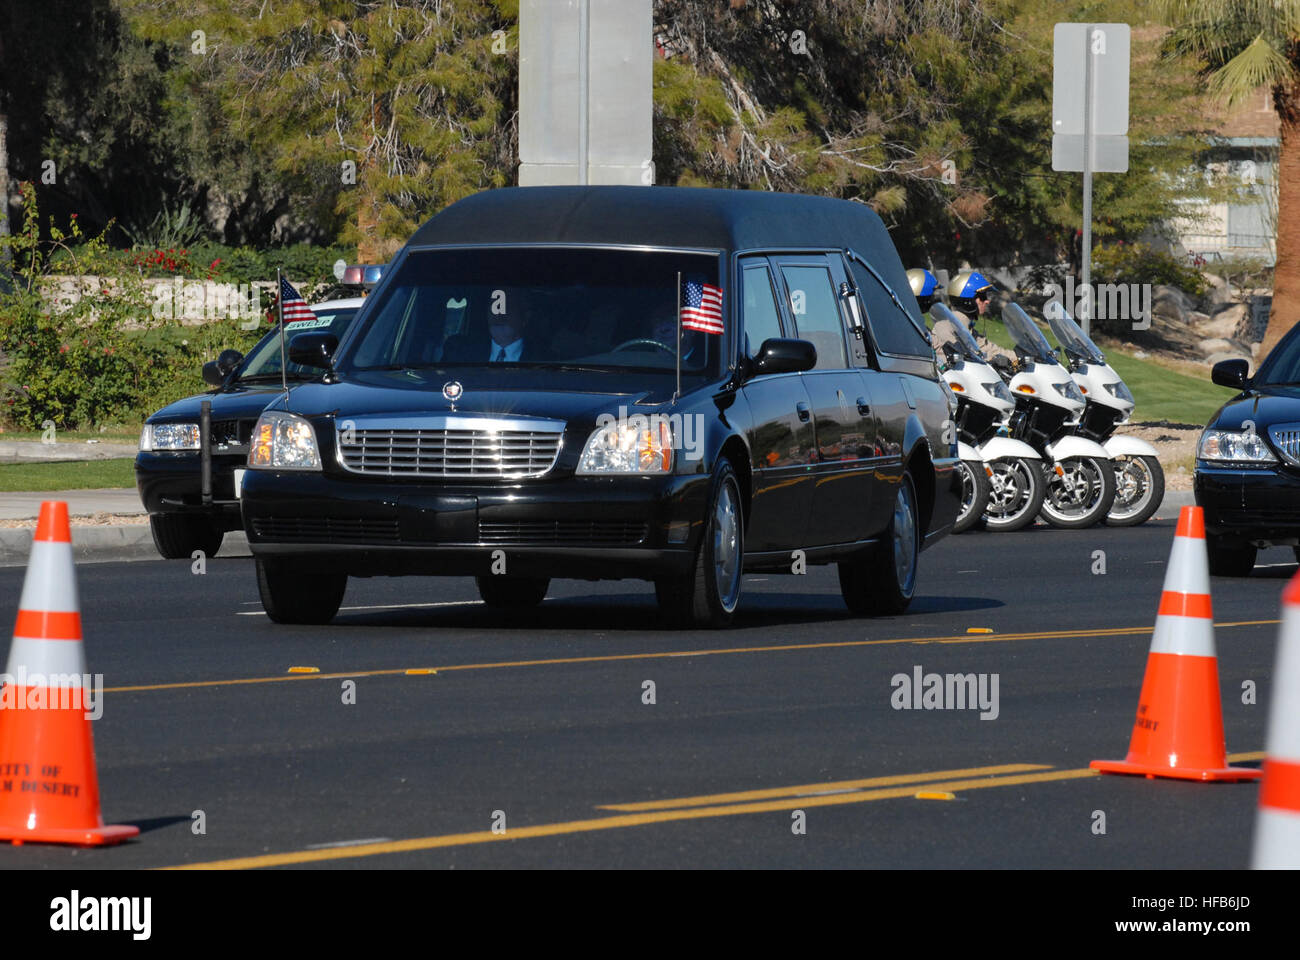 The hearse containing the casket of former President Gerald R. Ford arrives at St. Margaret's Episcopal Church in Palm Desert, Calif., Dec. 29, 2006.  Following services in California, Ford's remains will be flown to Washington, D.C., for a state funeral in the Capitol Rotunda and a funeral service at the Washington National Cathedral, followed by burial services in Michigan.  Ford, the 38th president of the United States, passed away on Dec. 26th. (U.S. Navy photo by Cmdr. Jane Campbell) (Released) Defense.gov photo essay 061229-N-9909C-001 Stock Photo